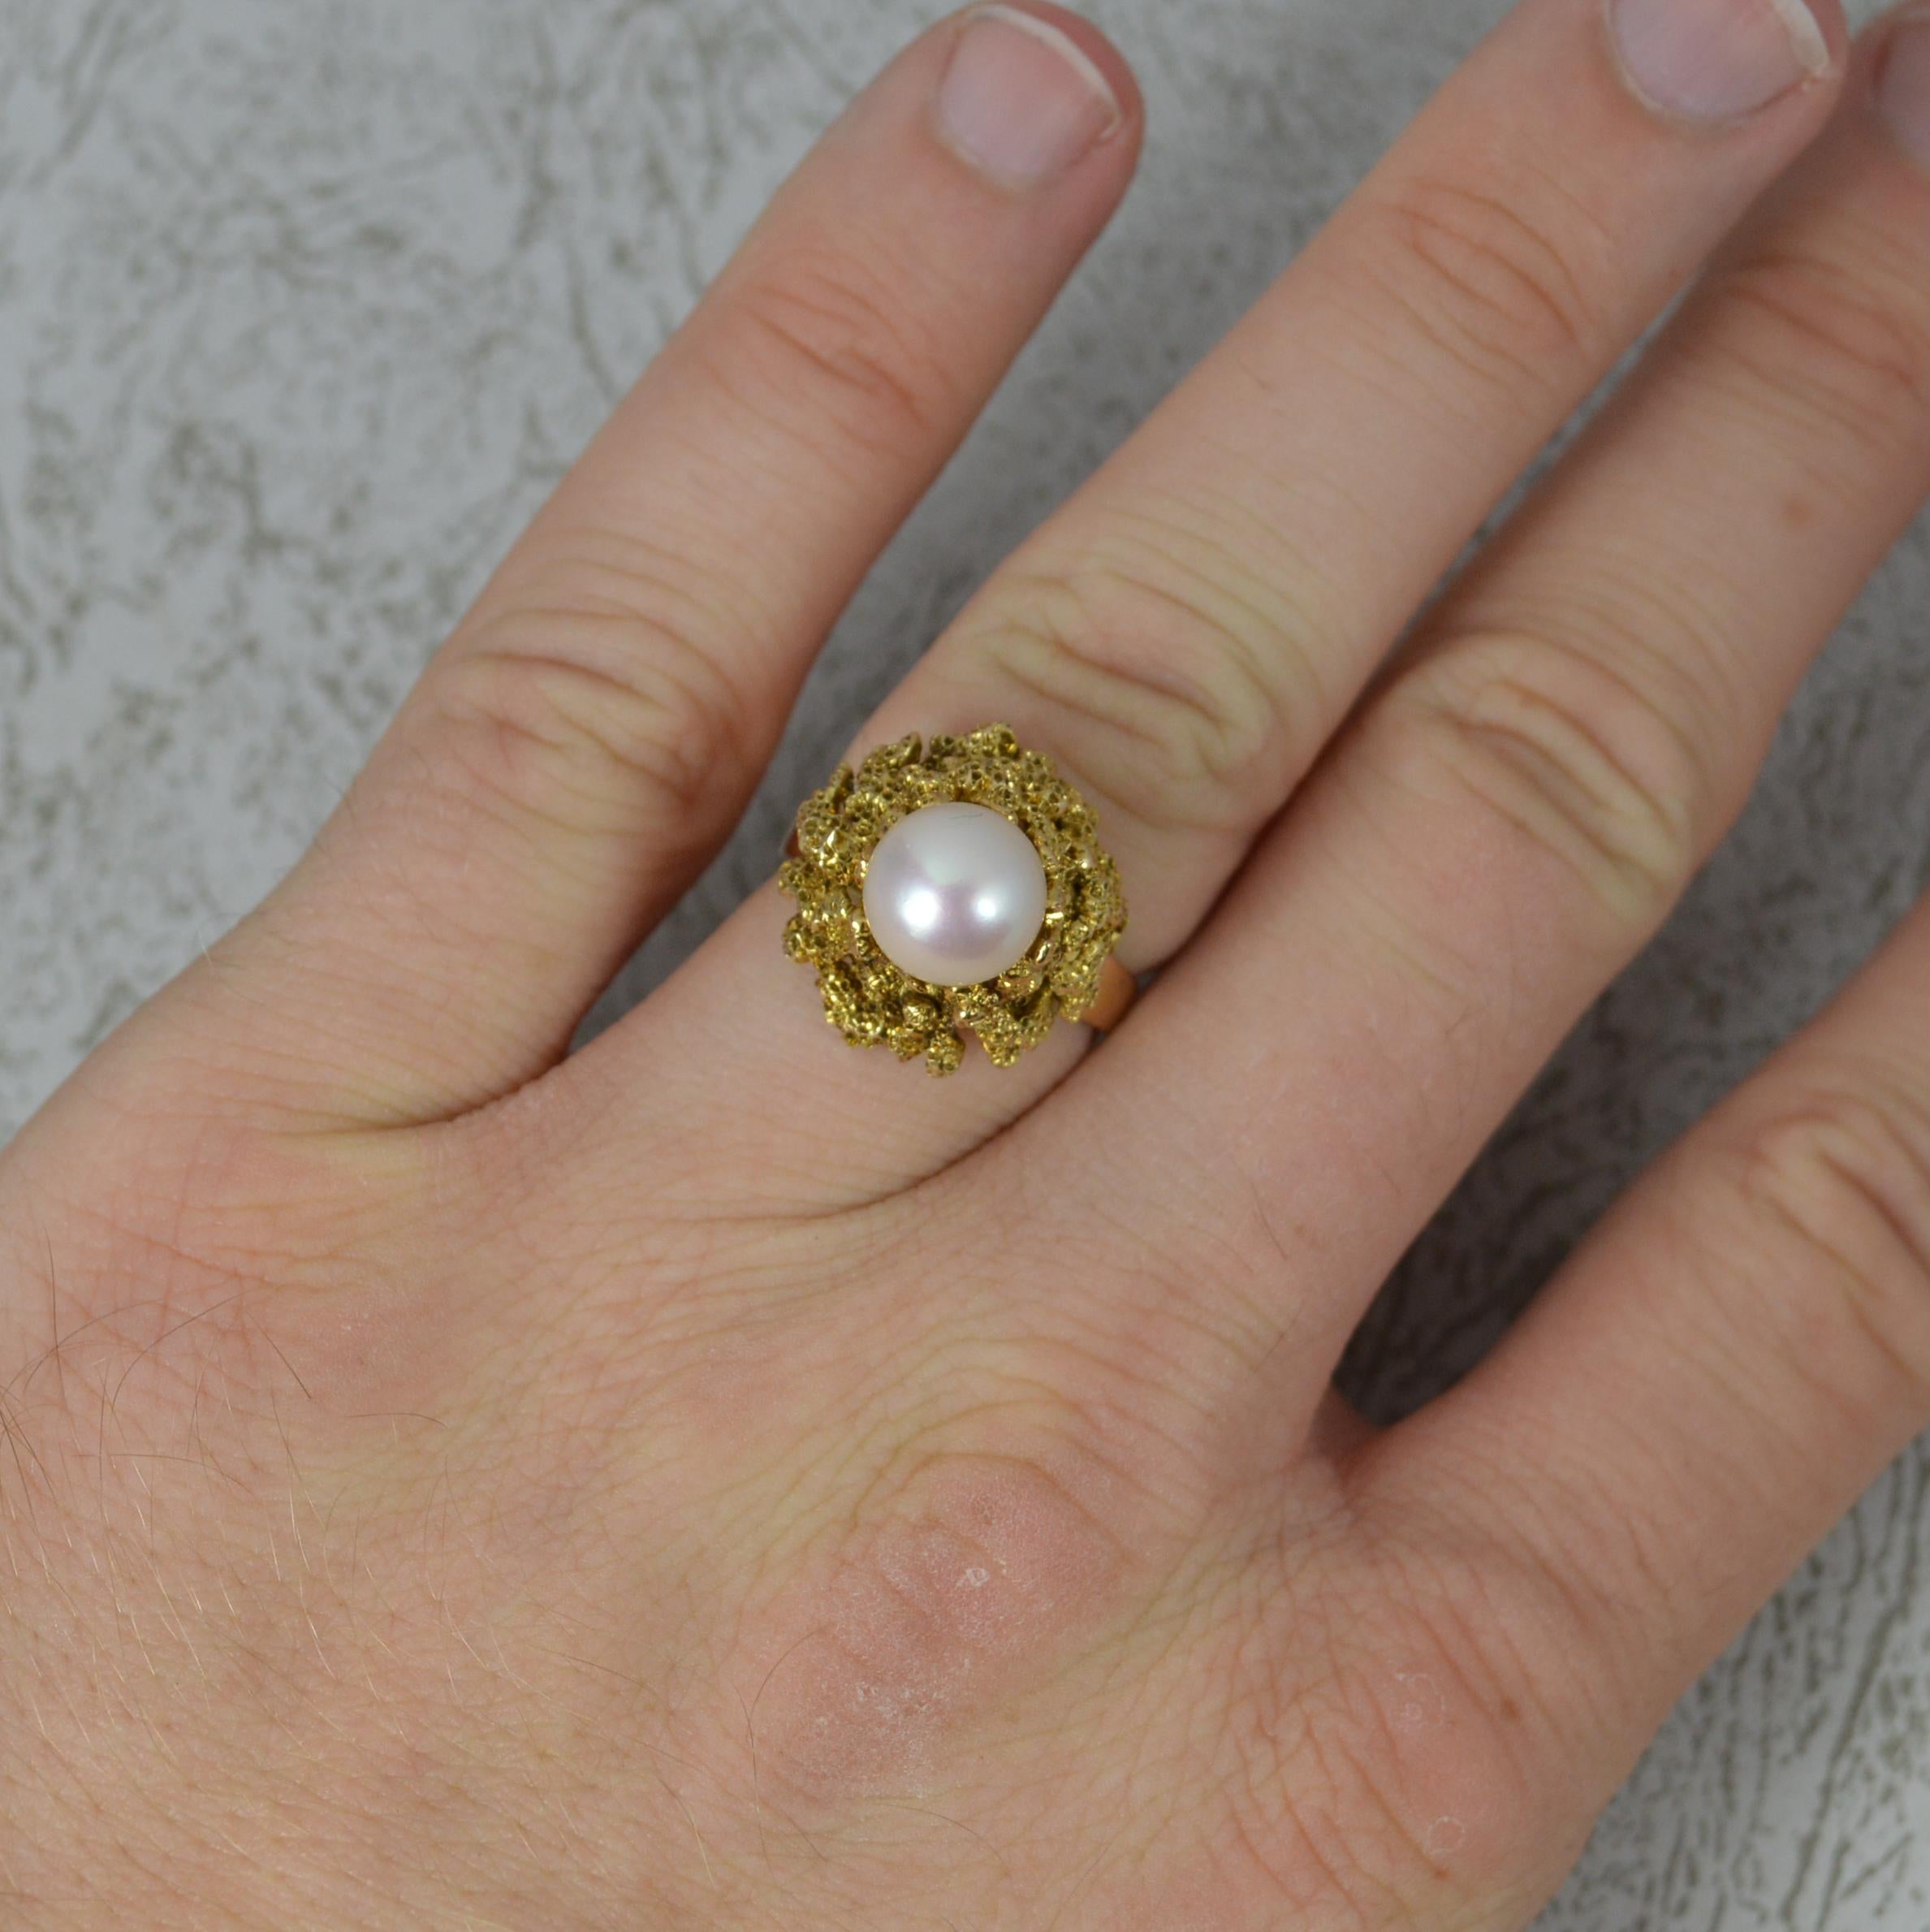 A superb Pearl solitaire statement ring.
Solid 14 carat yellow gold example.
Set with a single round pearl to centre. 8.2mm diameter. Surrounding is a naturalistic gold design.
Protruding 14.1mm off the finger.

CONDITION ; Very good. Well set